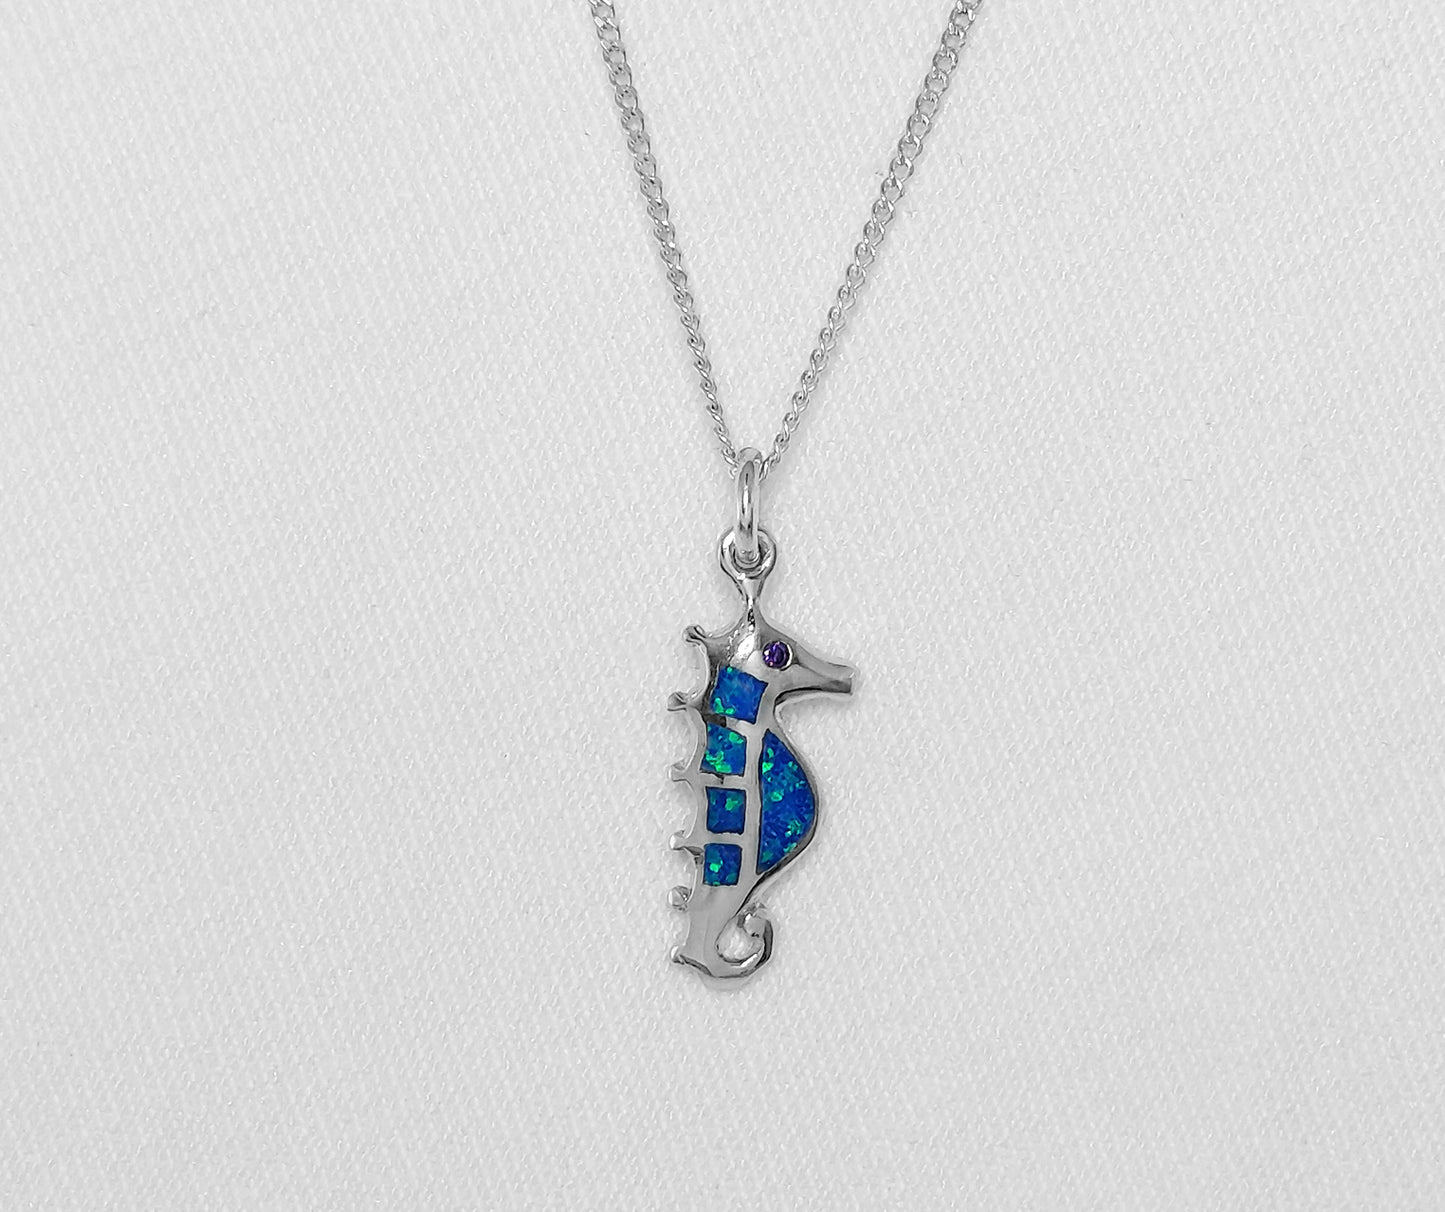 Sterling Silver Seahorse Pendant with Blue Opal Inlay